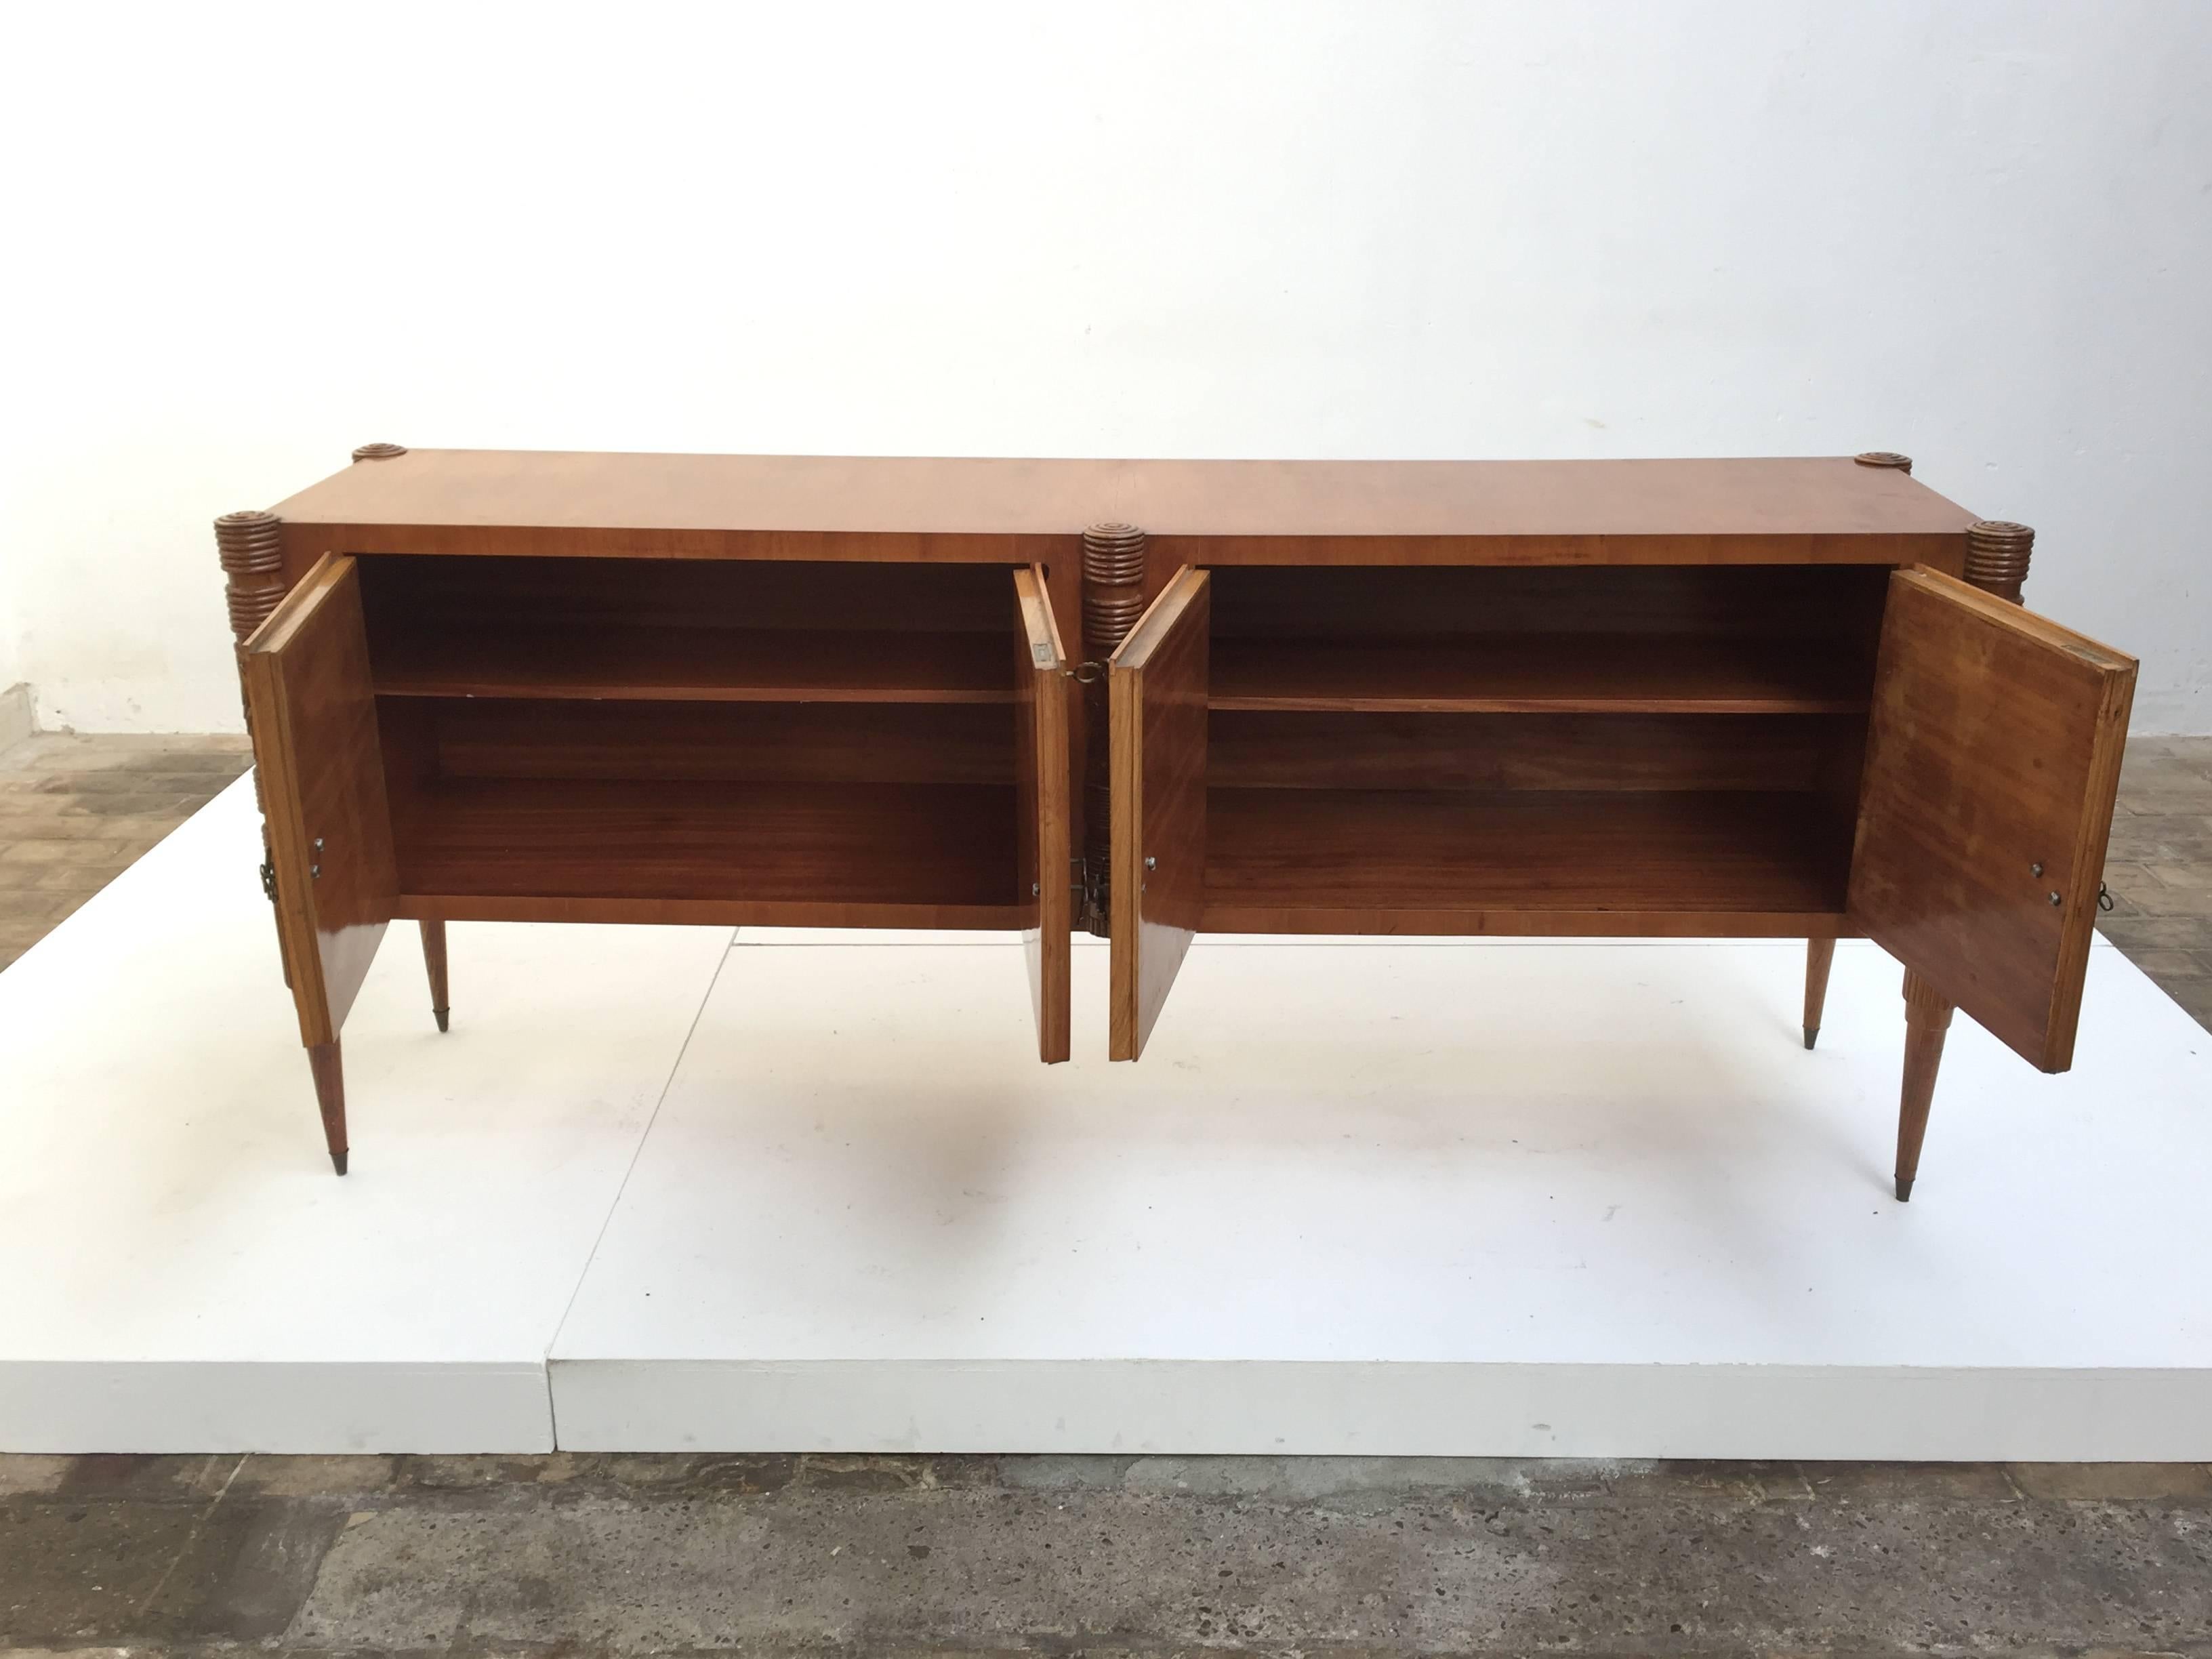 Beautiful four-door credenza by Pier Luigi Colli, manufactured by the famed 'Fratelli Marelli' atelier in Cantu, Italy, circa 1950. This credenza is finished in maple wood in addition to stunning burl maple wood veneer with intricately carved